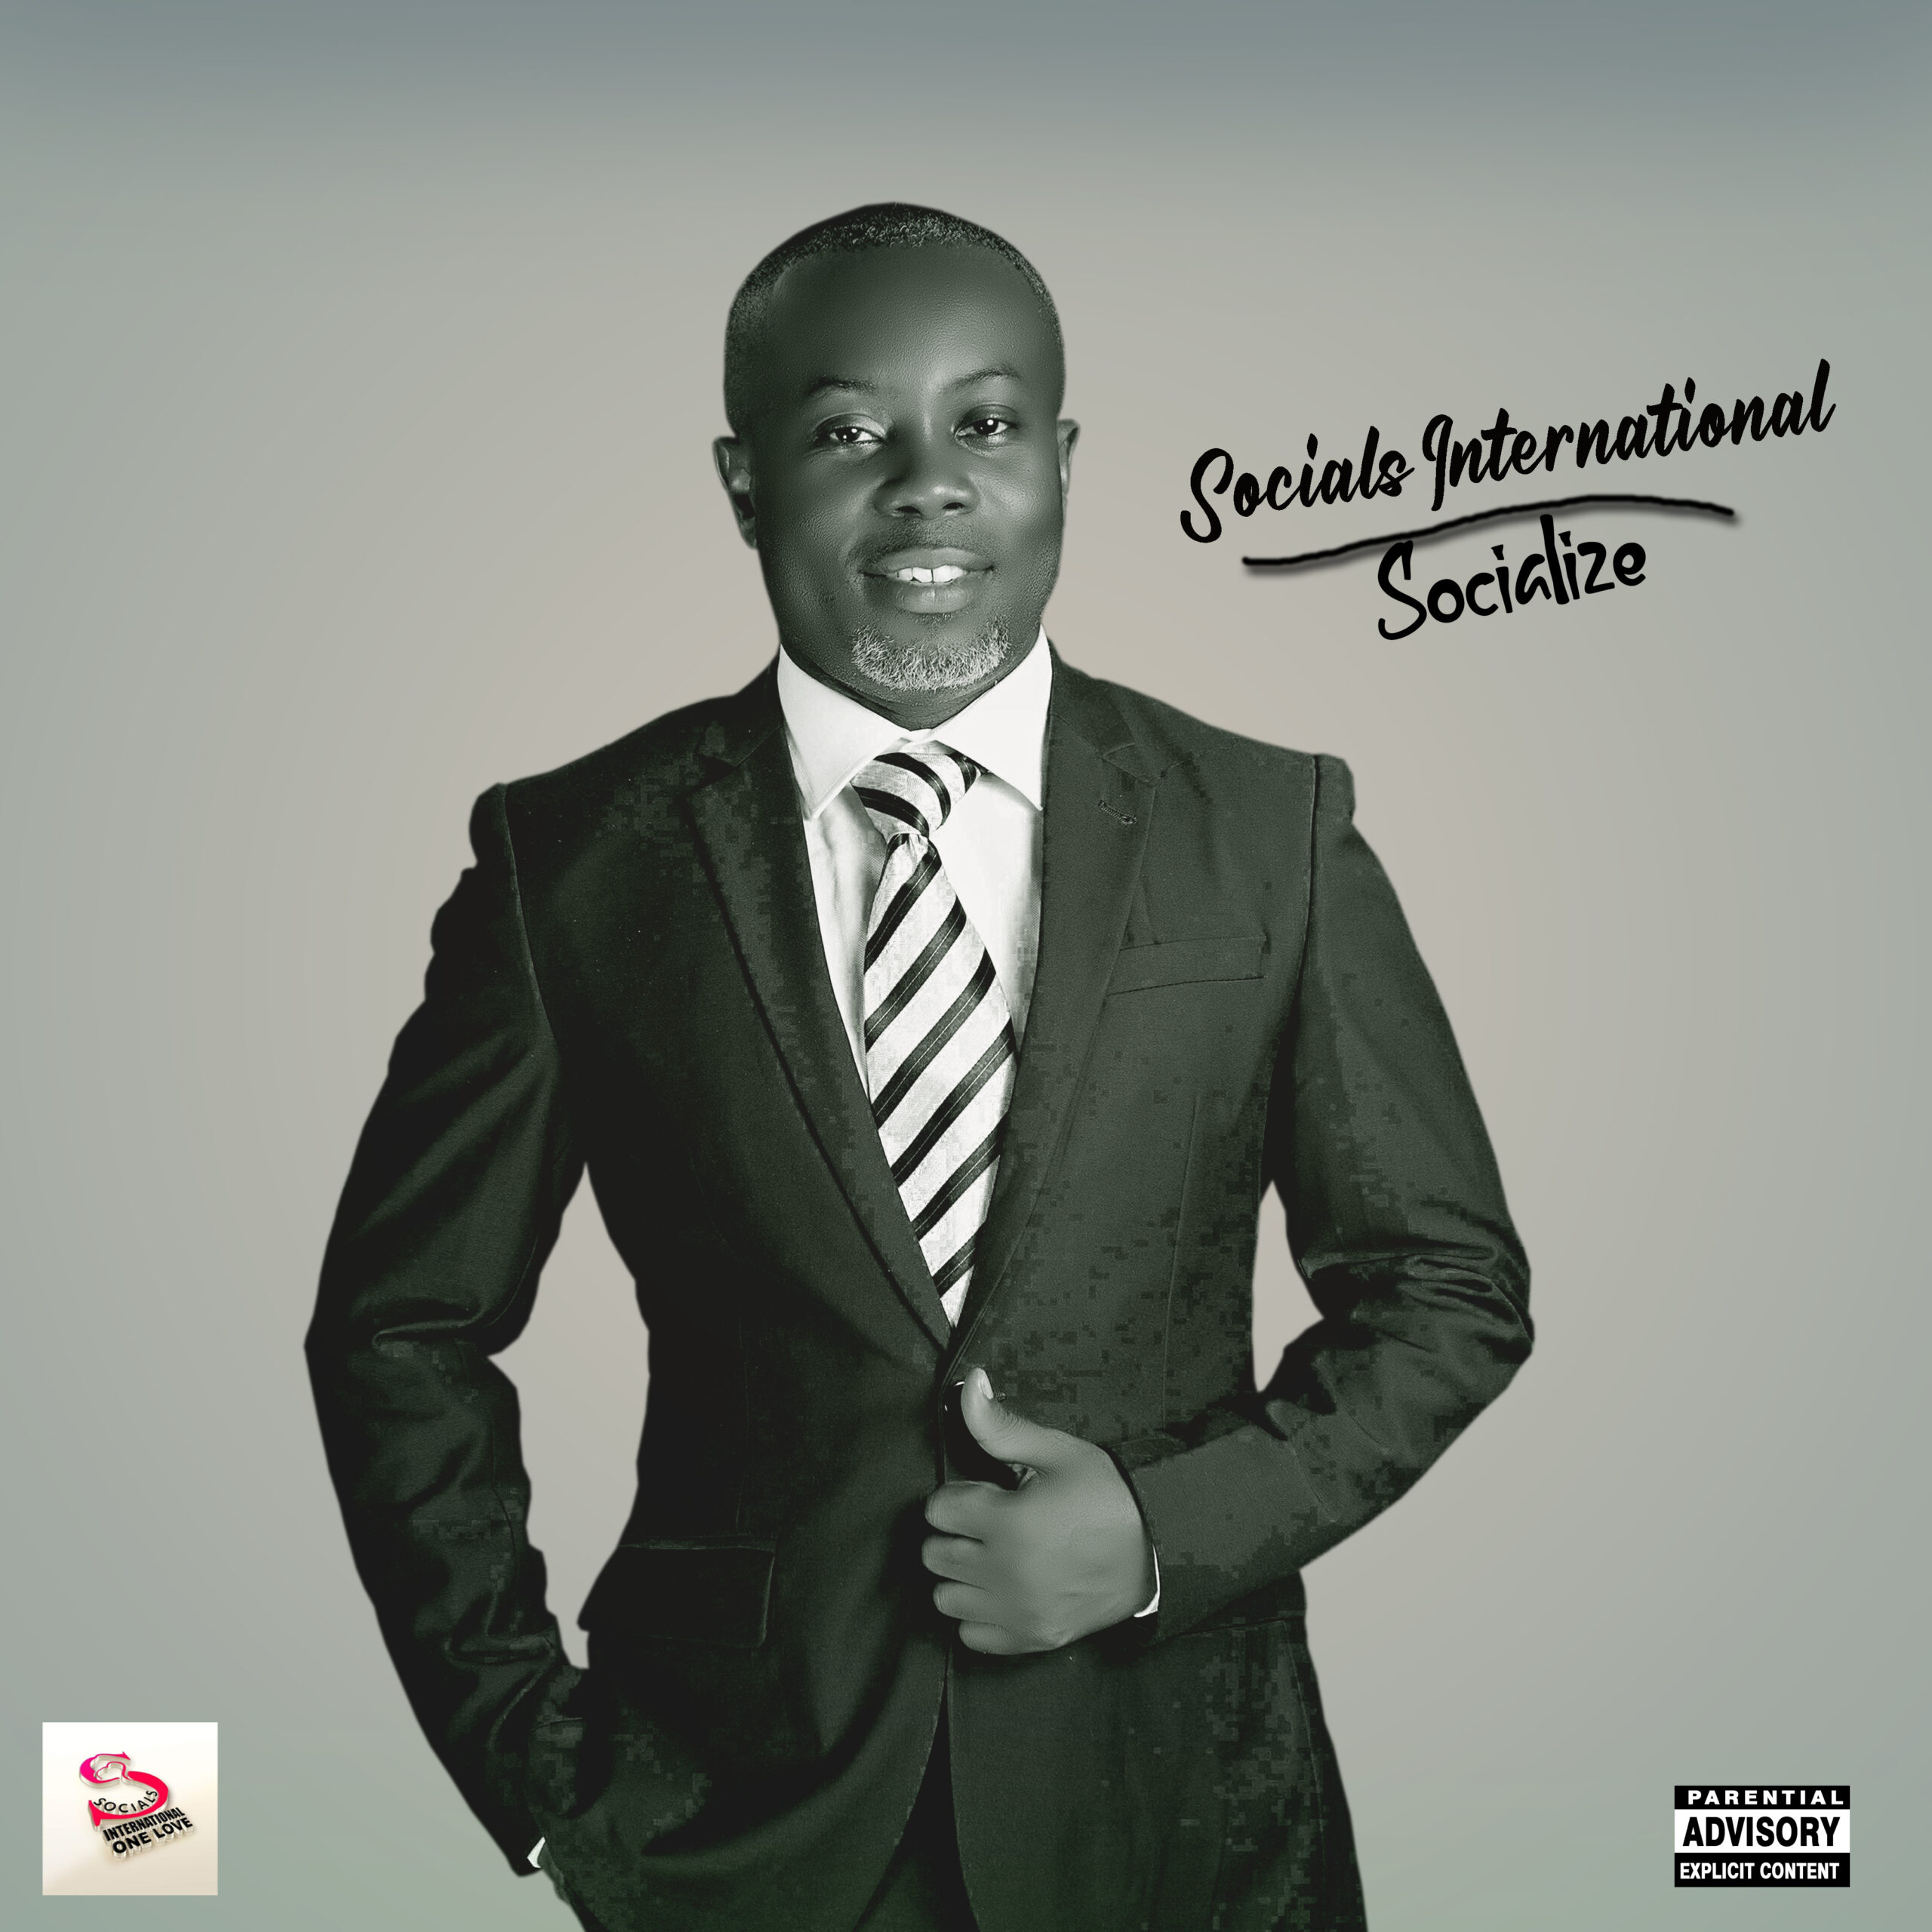 Listen To The New Socials International Album Tagged "SOCIALIZE" featuring Chiff Timz, Yawng Boss, Mas, Quiries, Arite and many more... 15